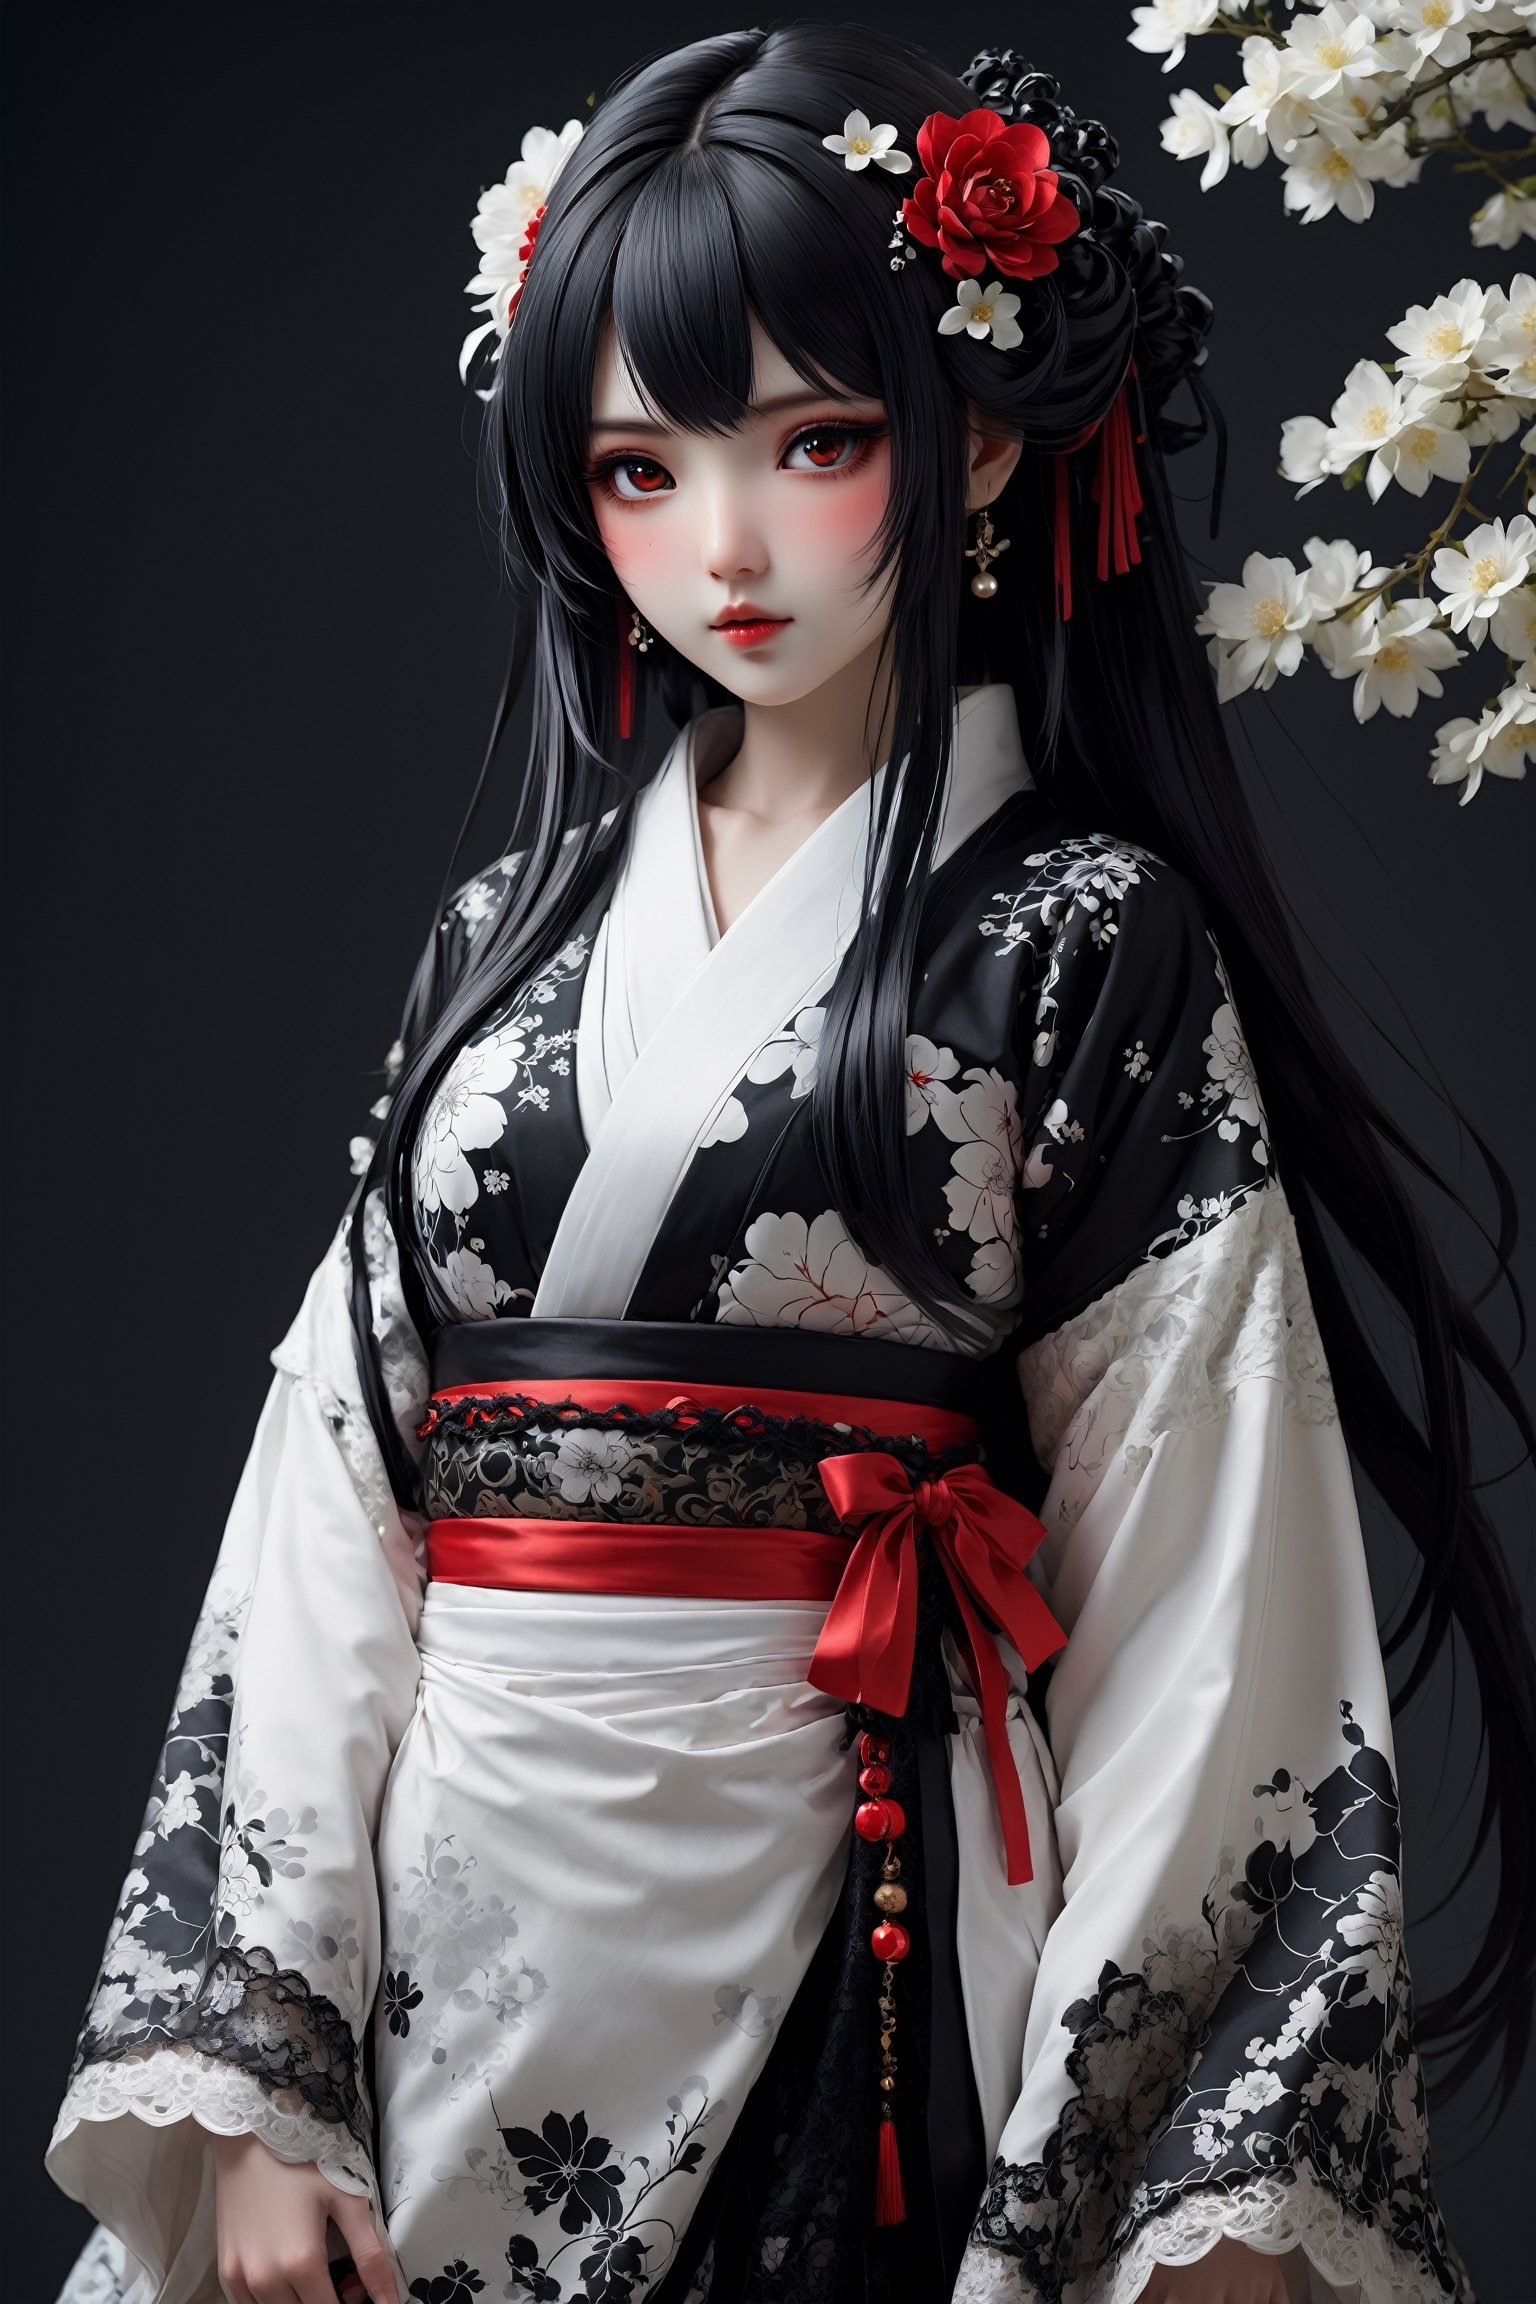 1Girl,The Japanese Gothic fantasy-style, Snow White, combines elements of traditional Japanese clothing with Gothic fashion,Her kimono is predominantly white, adorned with floral patterns and intricate black motifs. Gothic-style lace decorates the cuffs and hem, adding delicate details to the ensemble. Adorning her head is a Japanese-style hair ornament with Snow White's signature red ribbon, complementing her beautiful black hair,dal,white eyes